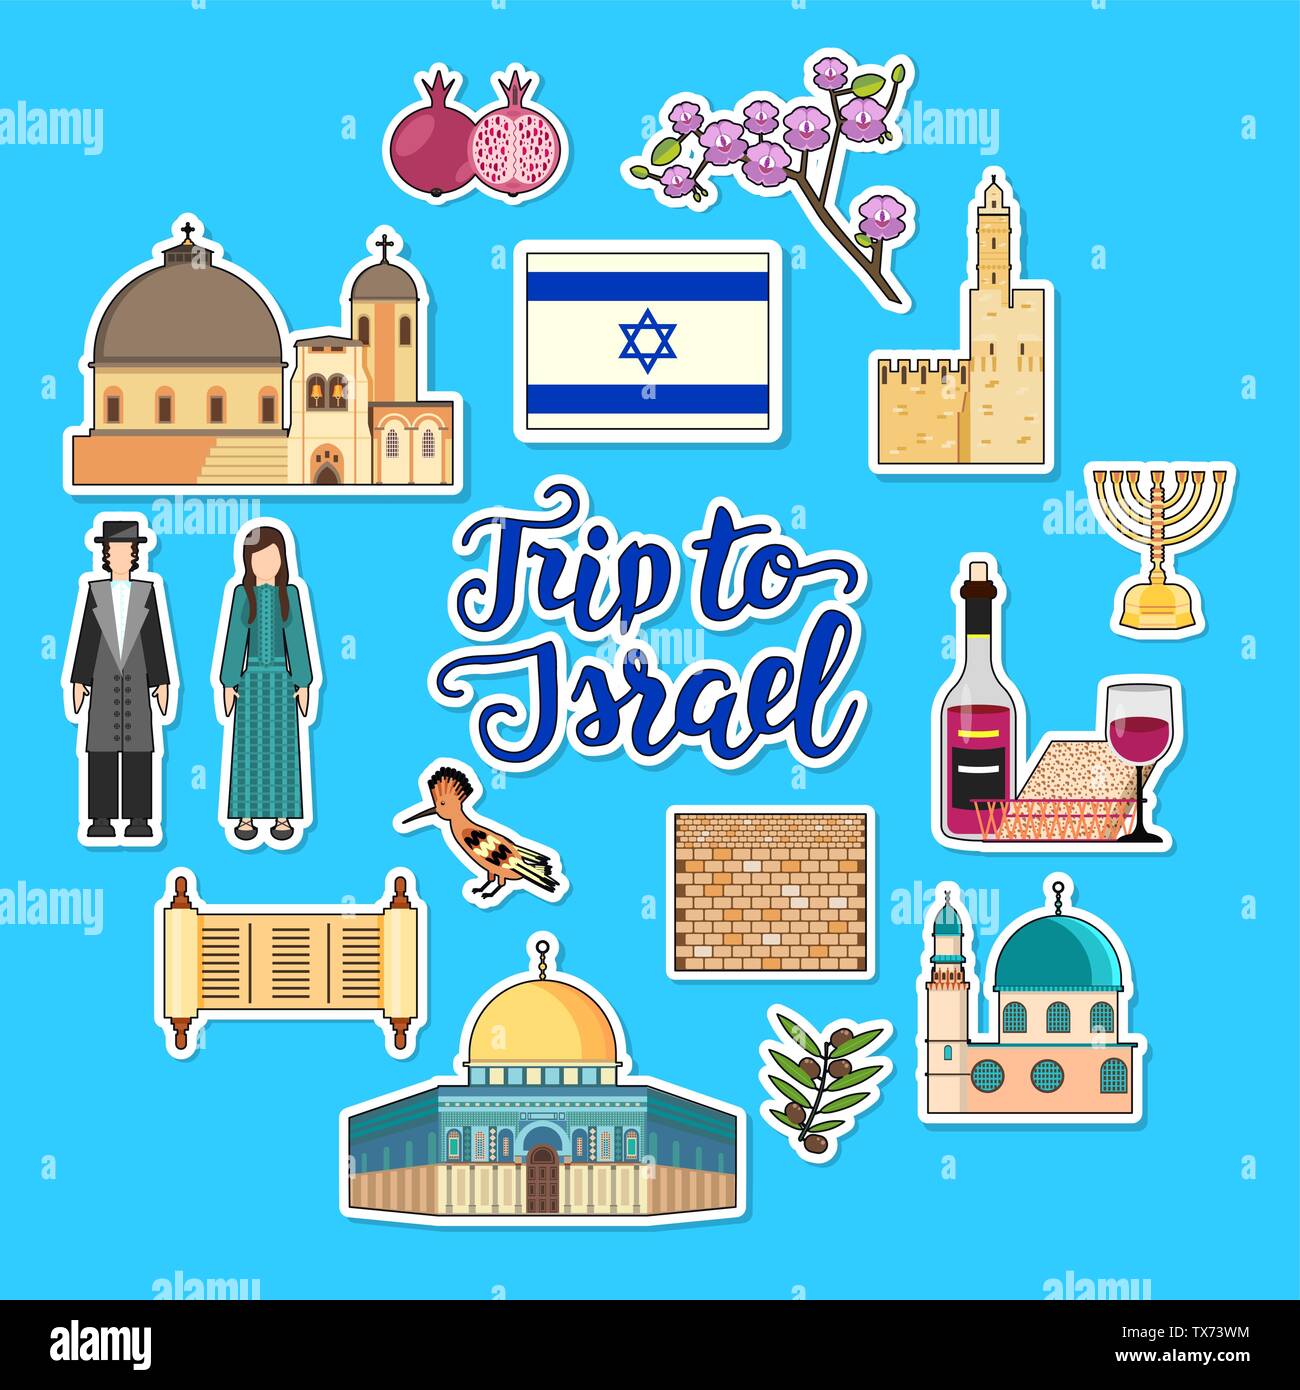 Country Israel travel vacation guide of goods, places and features. Set of architecture, fashion, people, items, nature background concept. Circle template design on flat sticker style Stock Vector